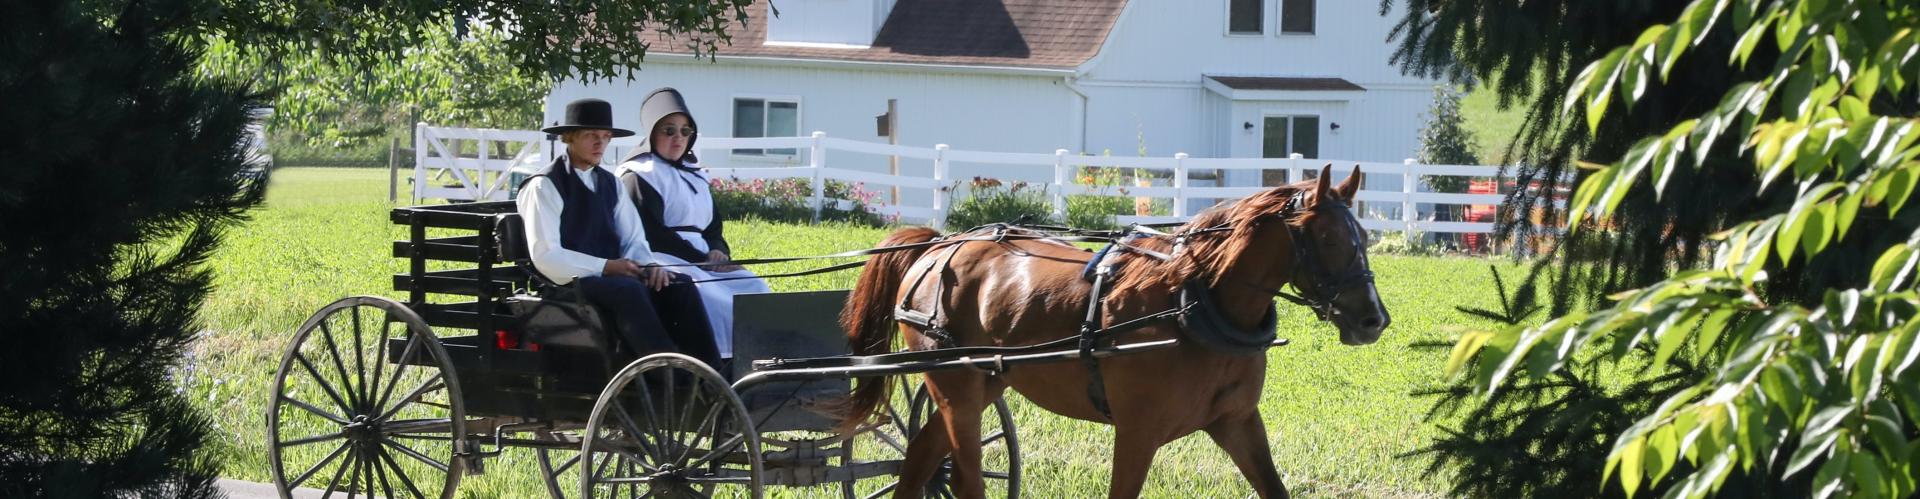 Mariage & Tradition : Les mariages Amish